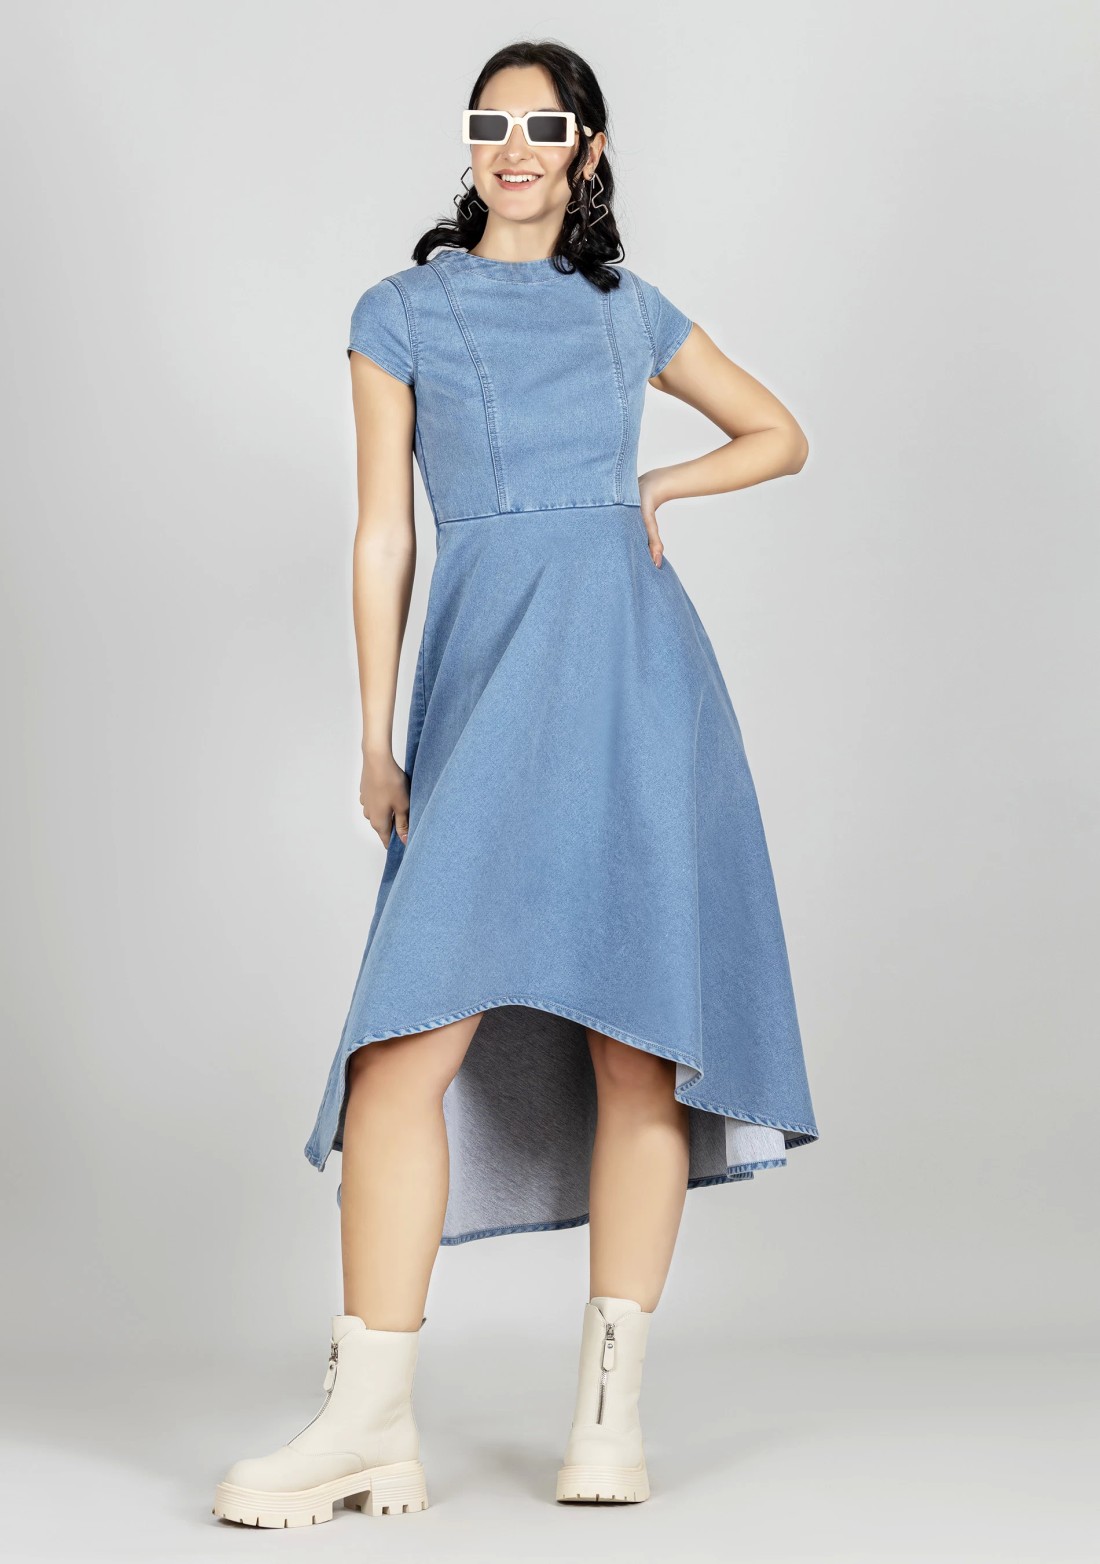 Blue Dresses: Buy Blue Dresses Online at Best Prices in India - Snapdeal